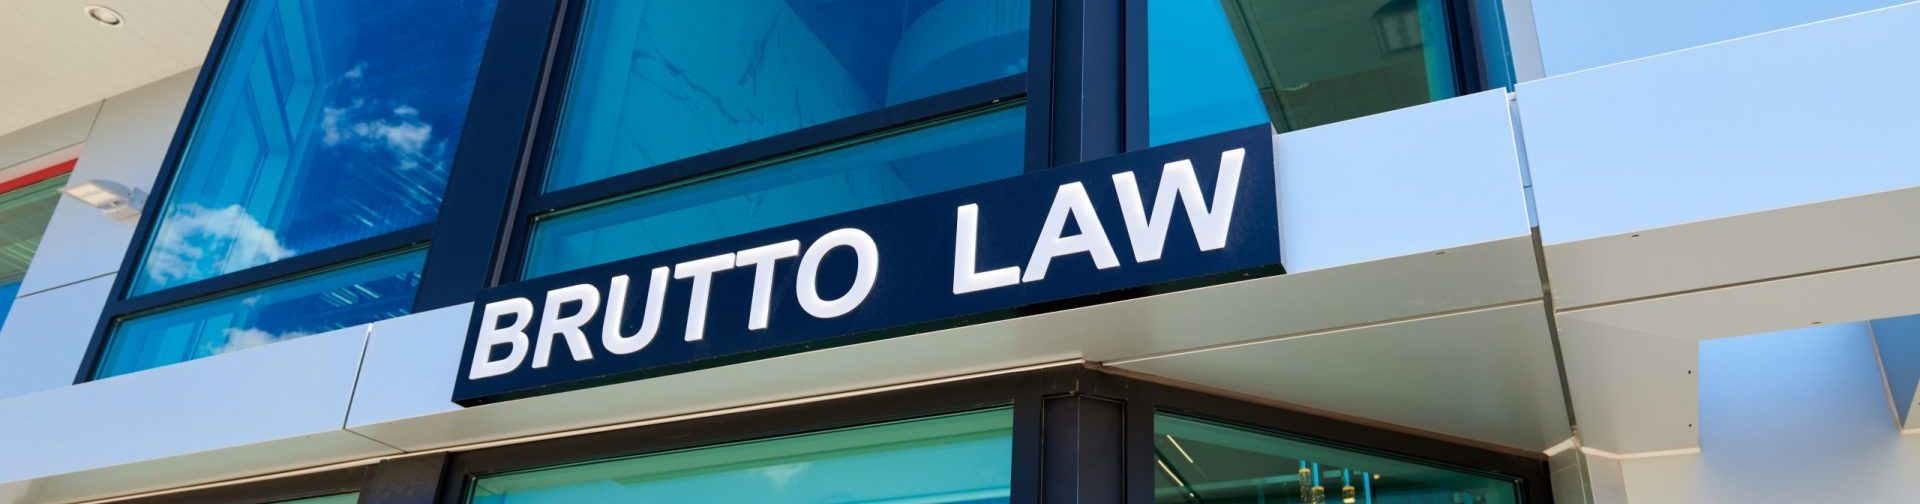 Brutto Law Exterior Sign